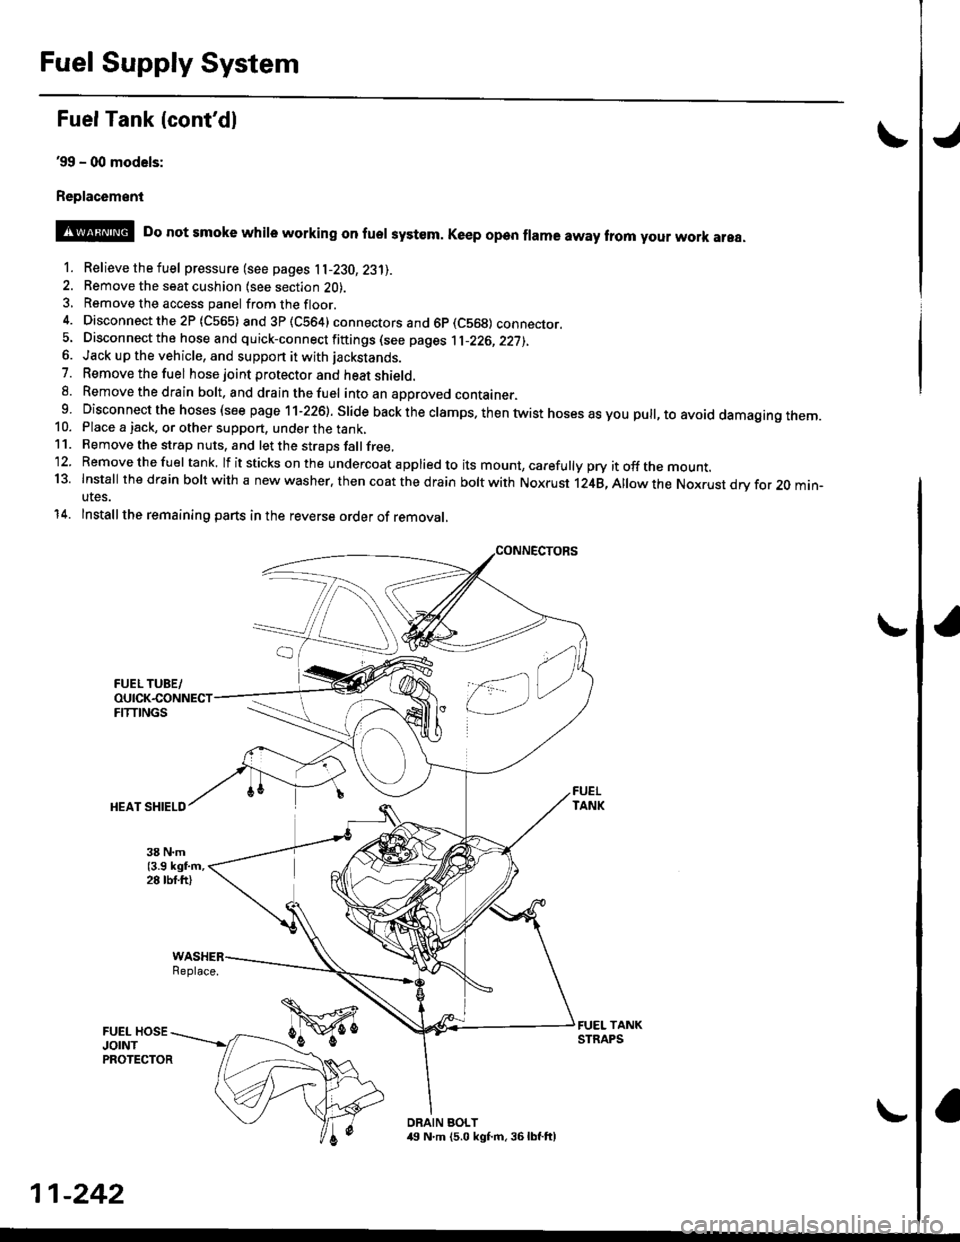 HONDA CIVIC 1996 6.G Workshop Manual Fuel Supply System
Fuel Tank {contdl
39 - (xt models:
Replac6ment
o
@ Do not smoke whire working on fuer system. Ke€p open frama away trom your work area.
1. Relievethefuel pressure (see pages 11-2